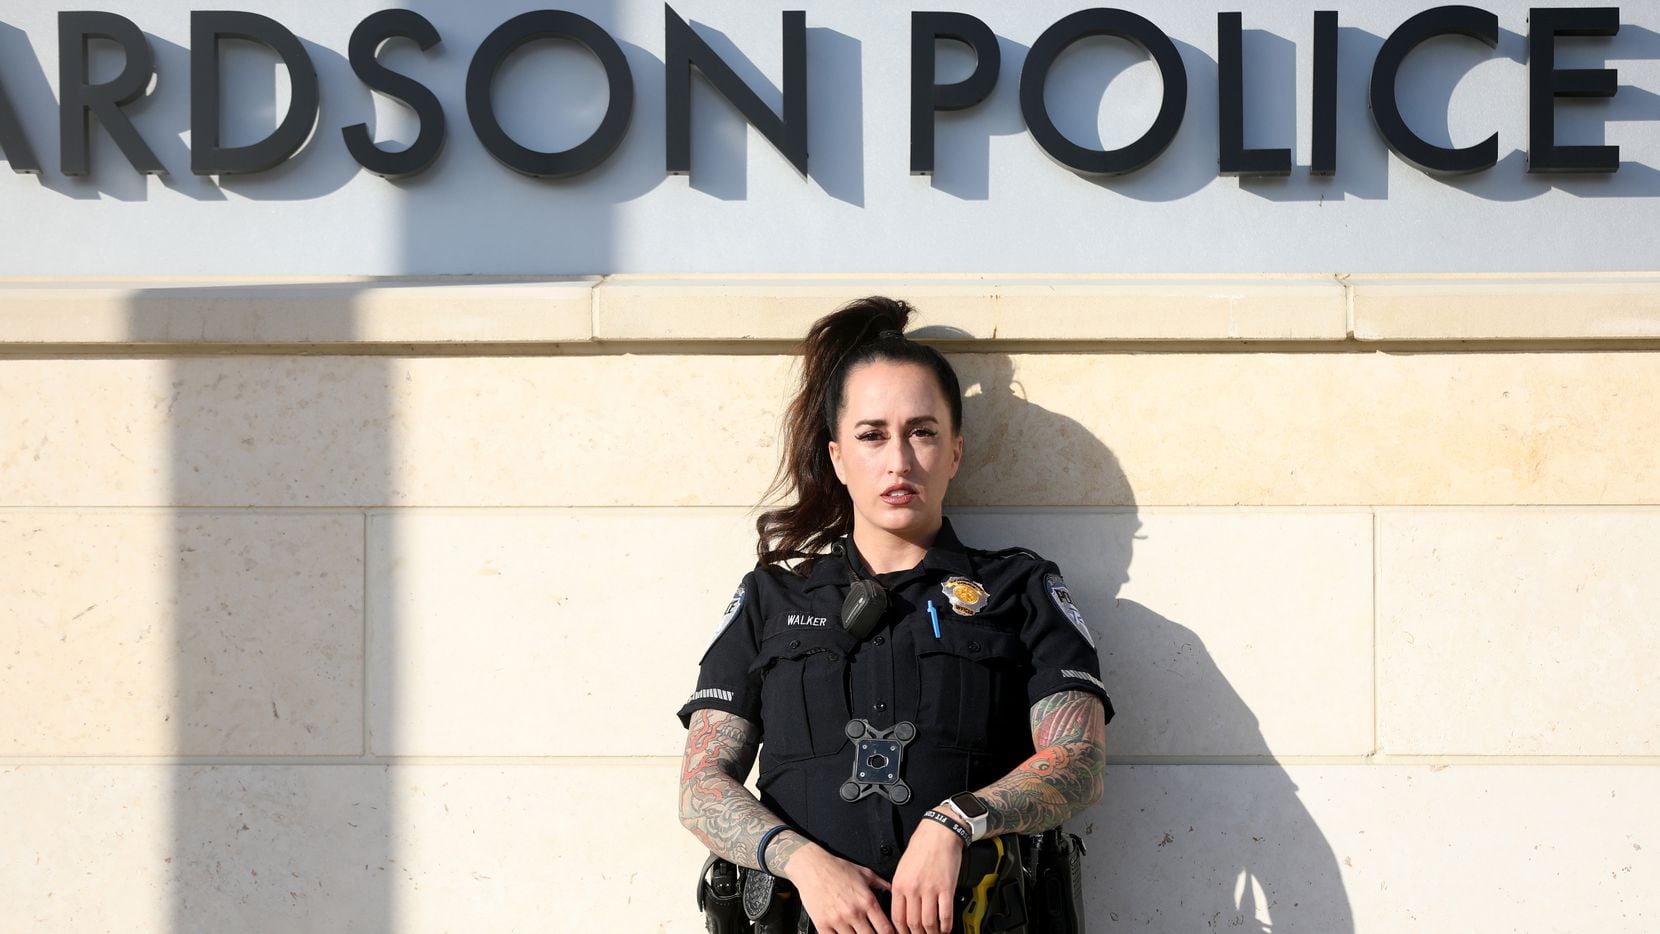 Police officer Kayla Walker is a rare breed in the modern world. She revealed what she calls...